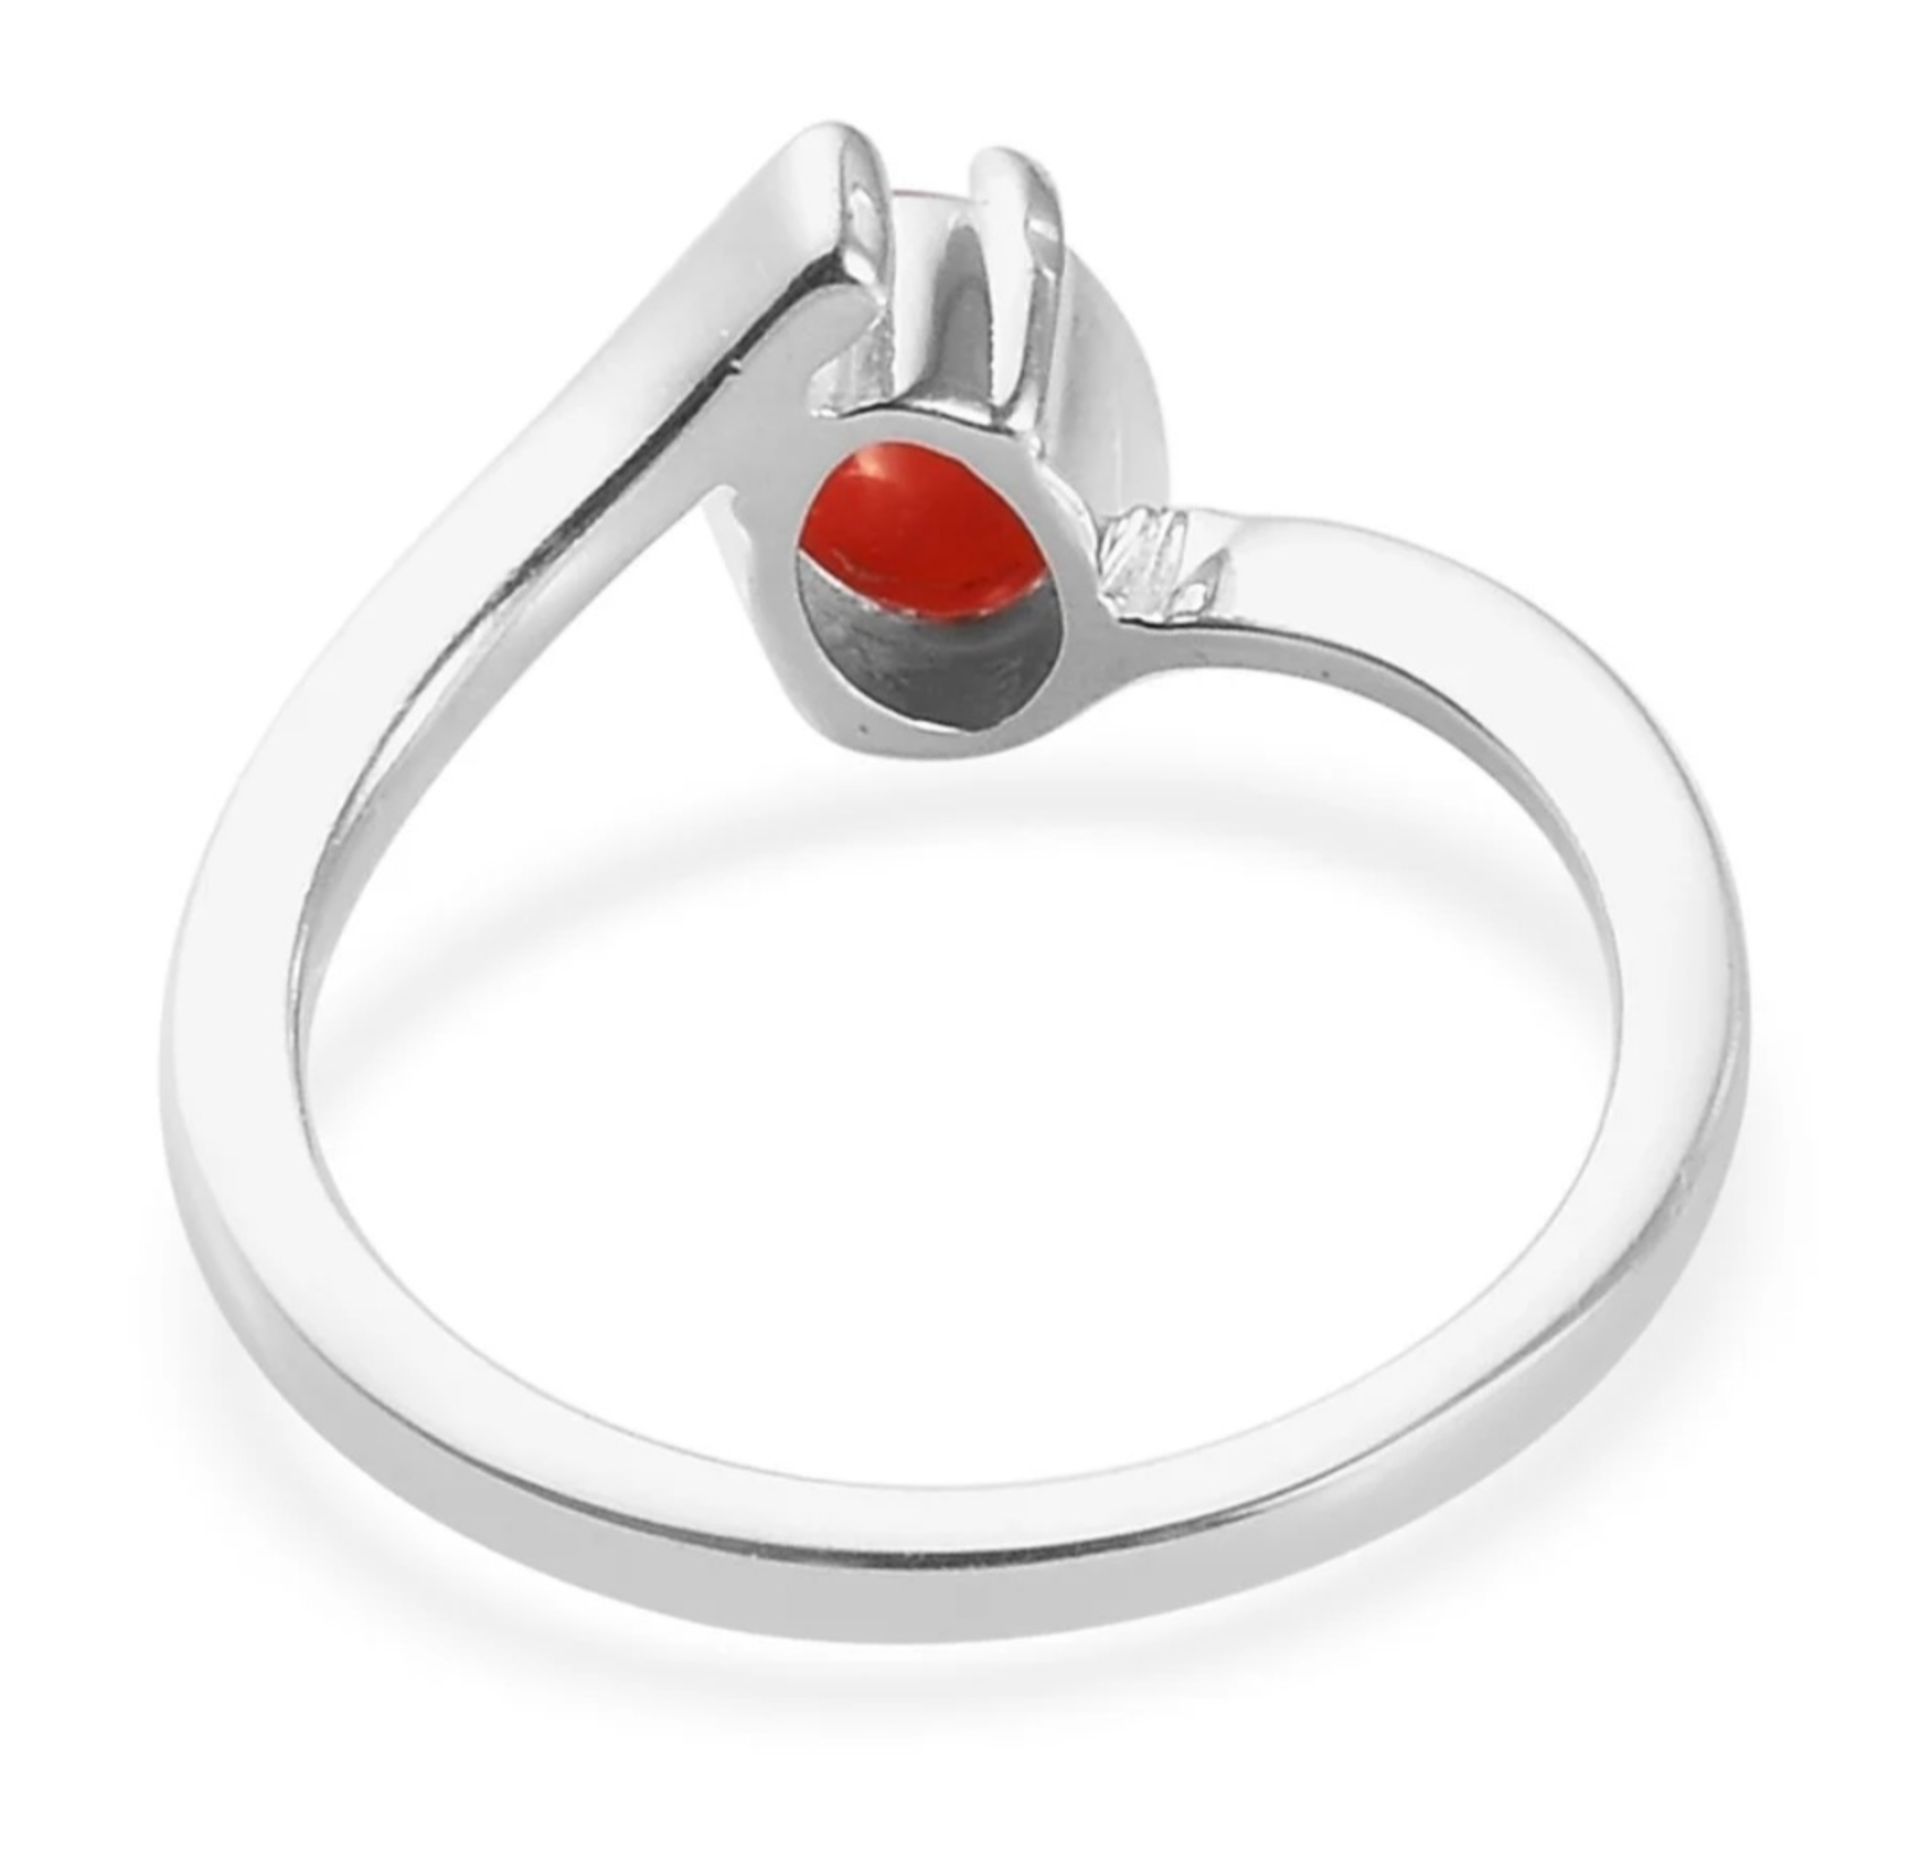 NEW!! Natural Coral Ring & Earrings in Sterling Silver - Image 3 of 6